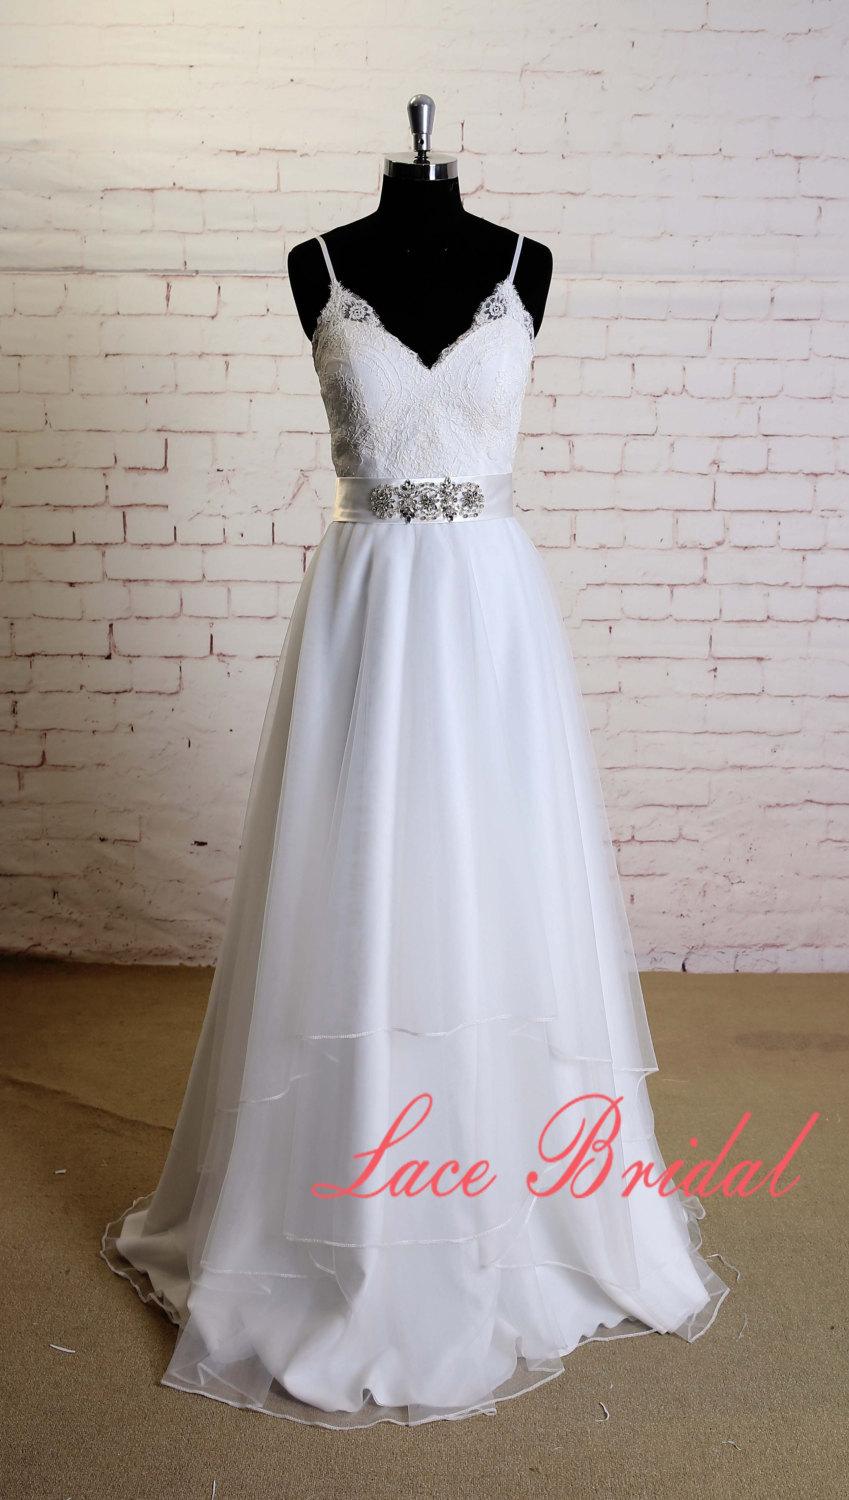 Wedding - Soft Layered Tulle Skirt Wedding Dress with Spaghetti Straps Classic Lace Bodice Bridal Gown with Beading Sash